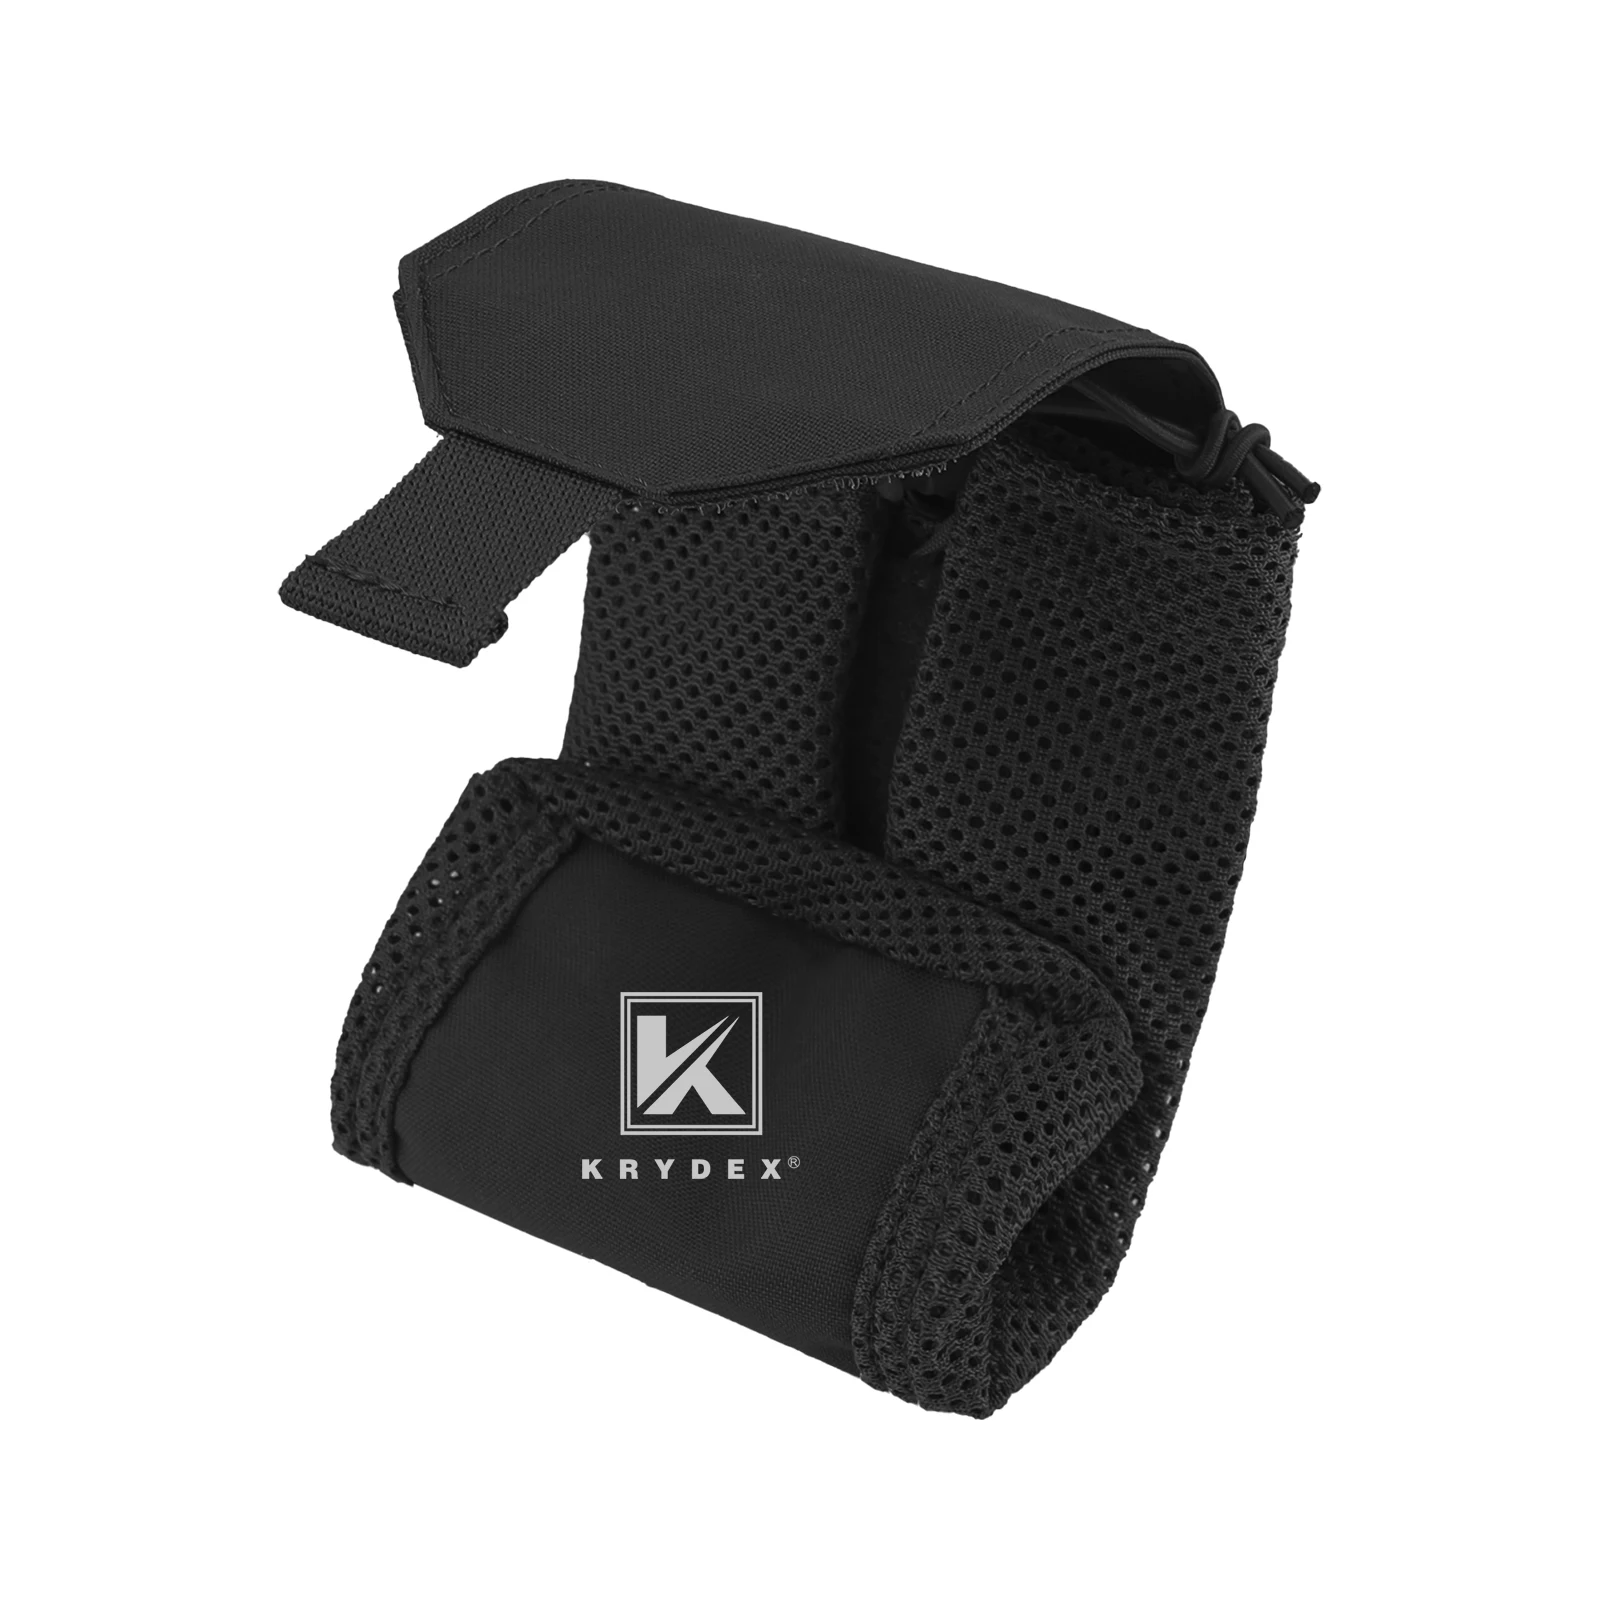 KRYDEX 500D Tactical Drop Dump Pouch Hunting Molle Magazine Pouch Camo Paintball EDC Foldable Recycling Storage Bag Gear